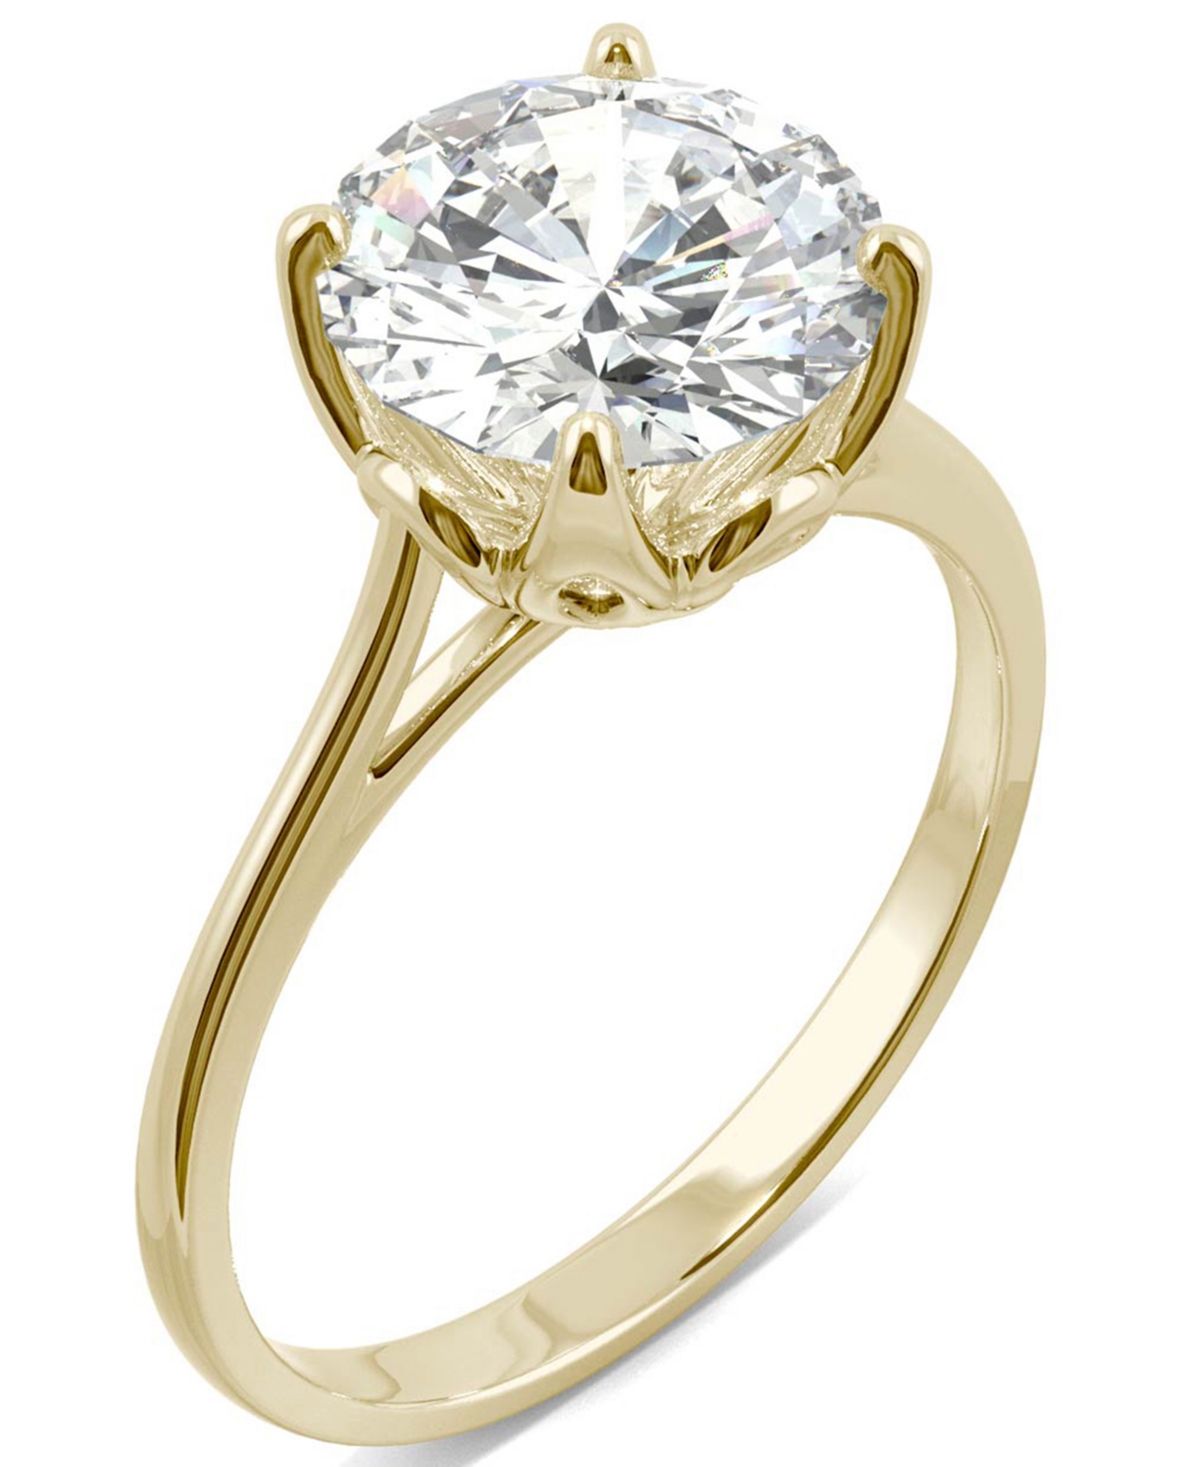 Moissanite Round Solitaire Ring (2-3/4 ct. tw. Diamond Equivalent) in 14k White Gold or 14k Yellow Gold - White Gold